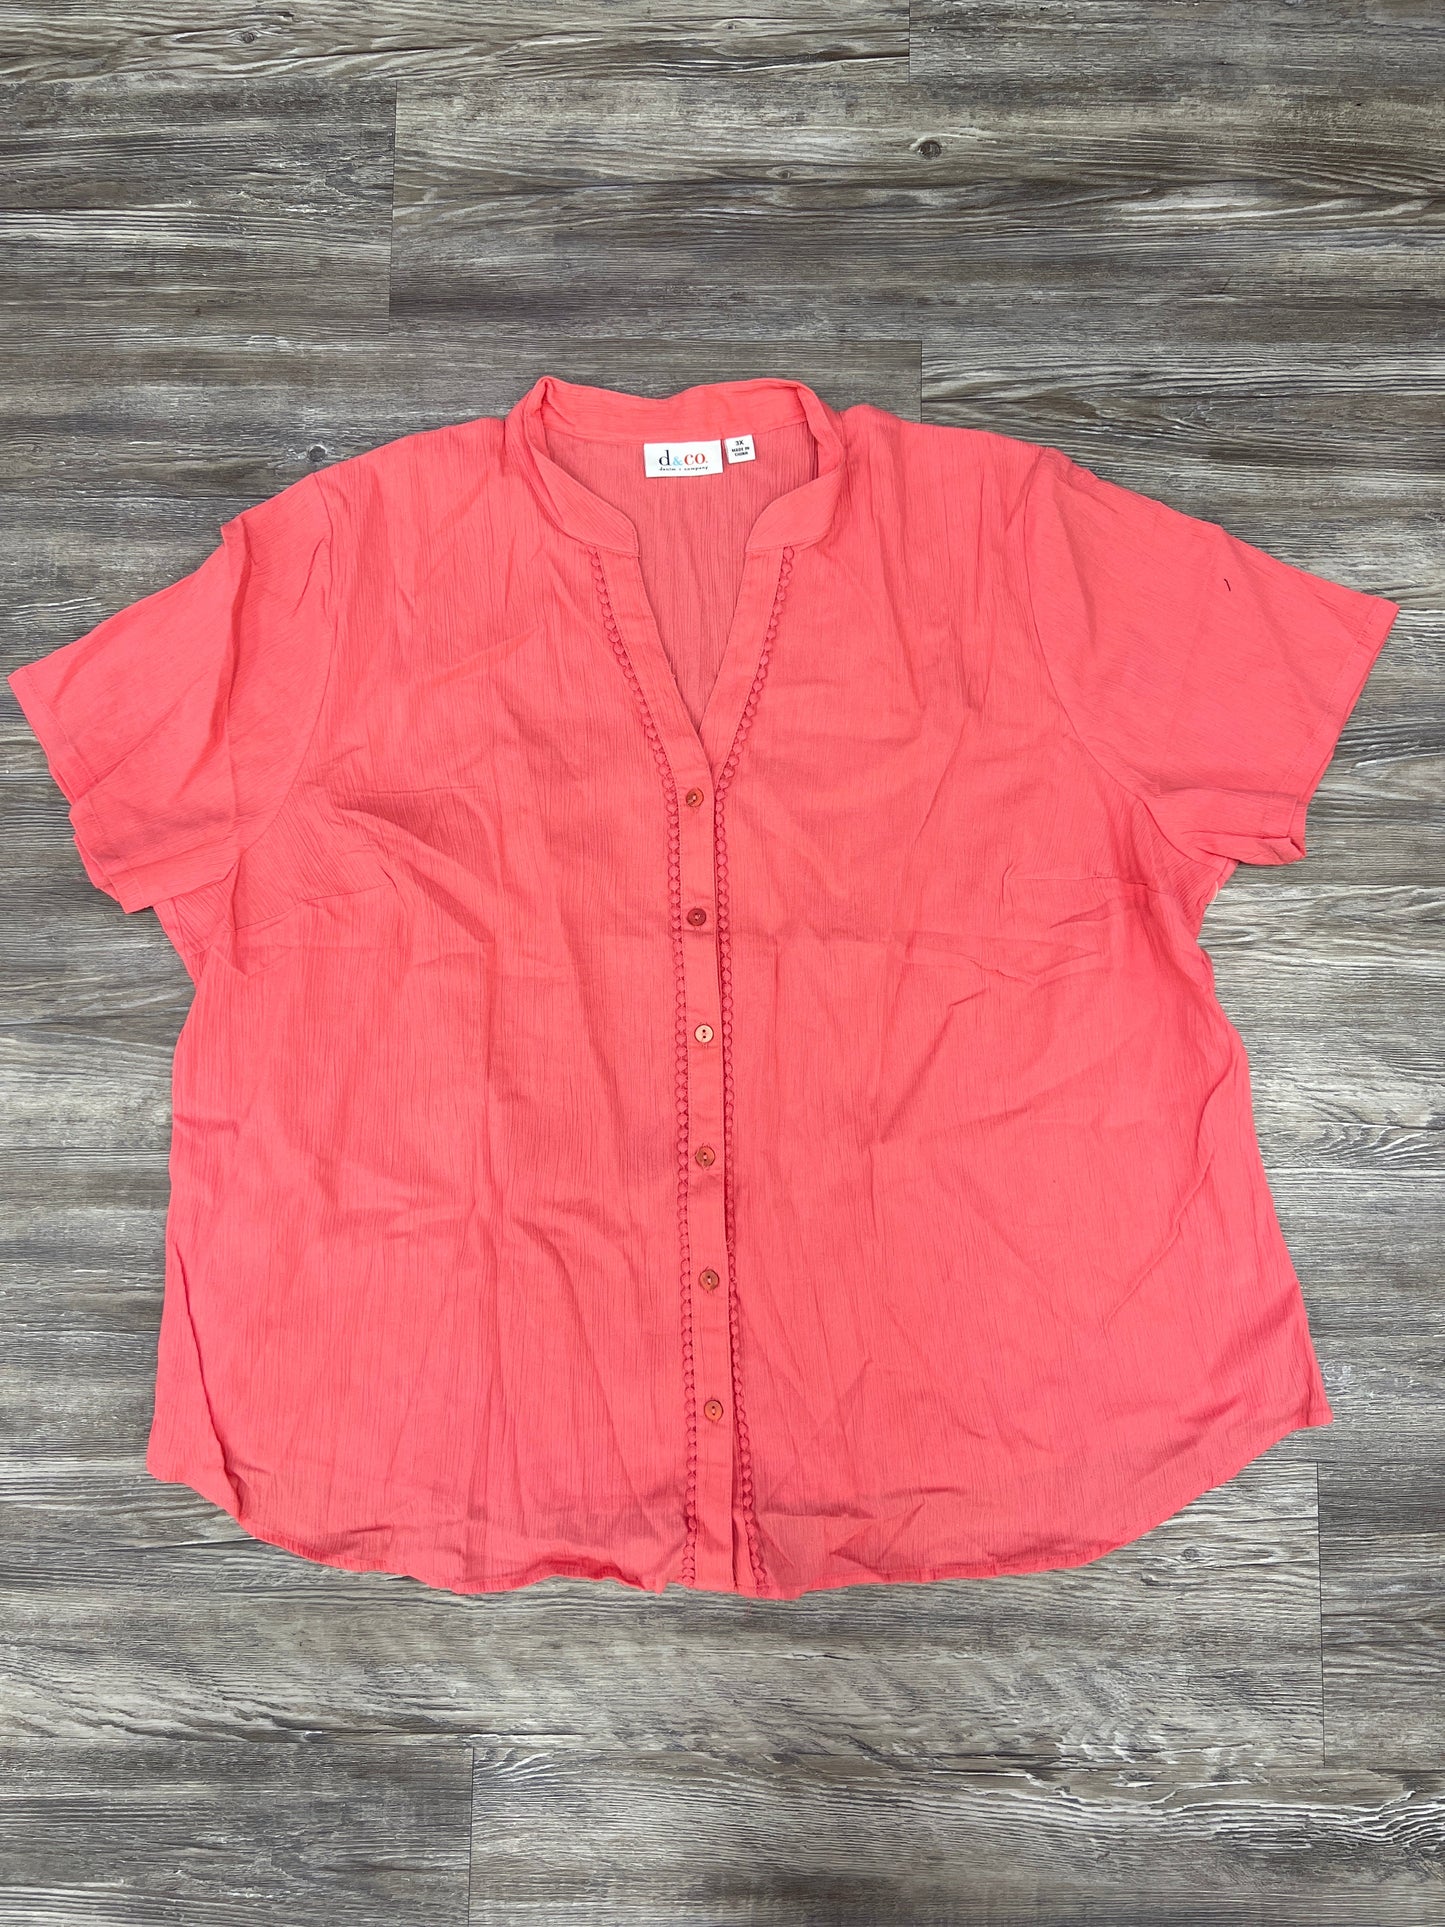 Top Short Sleeve By Denim And Co Size: 3x